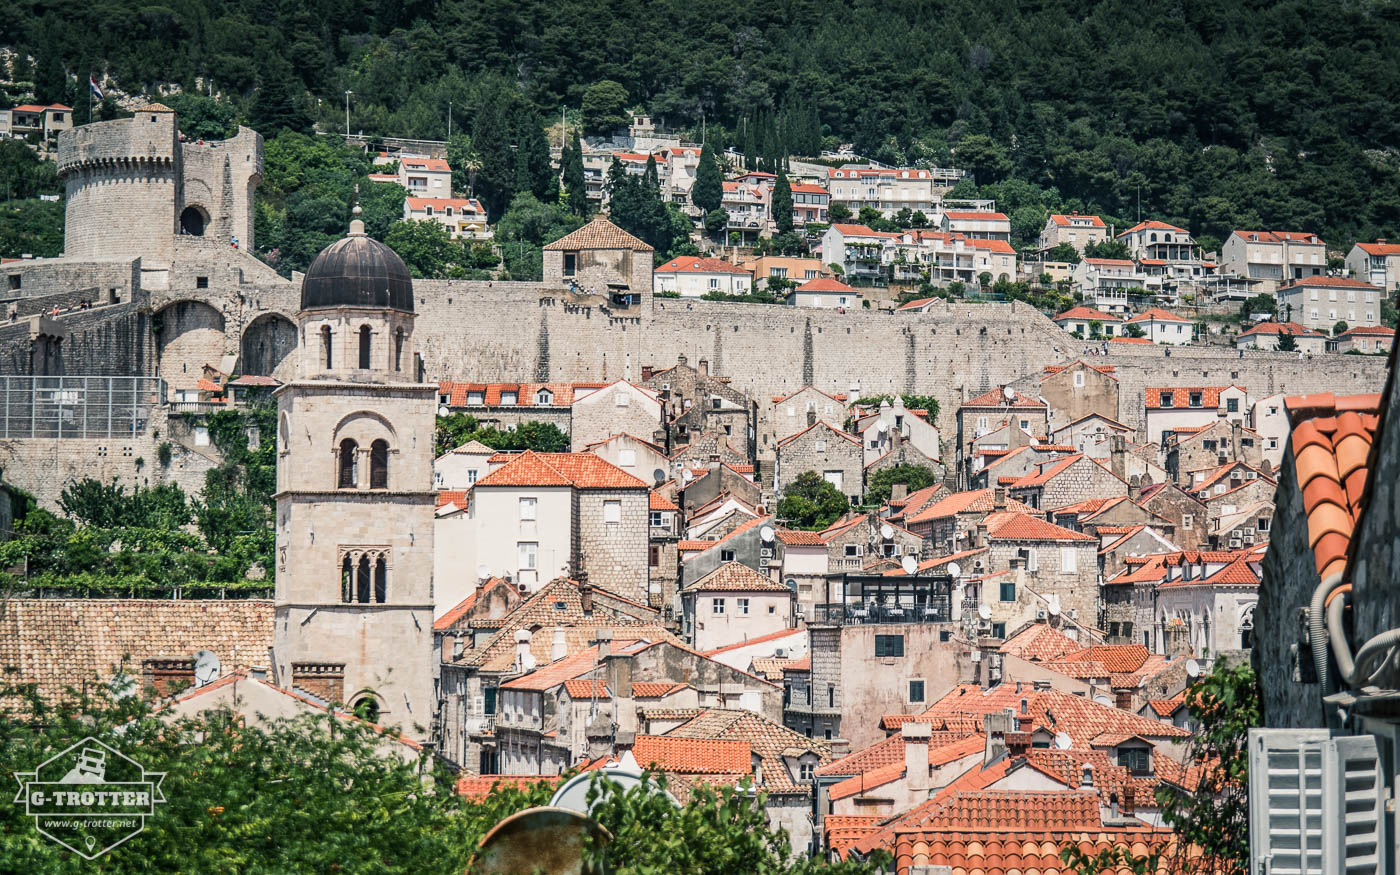 On the trail of Game of Thrones in Dubrovnik.